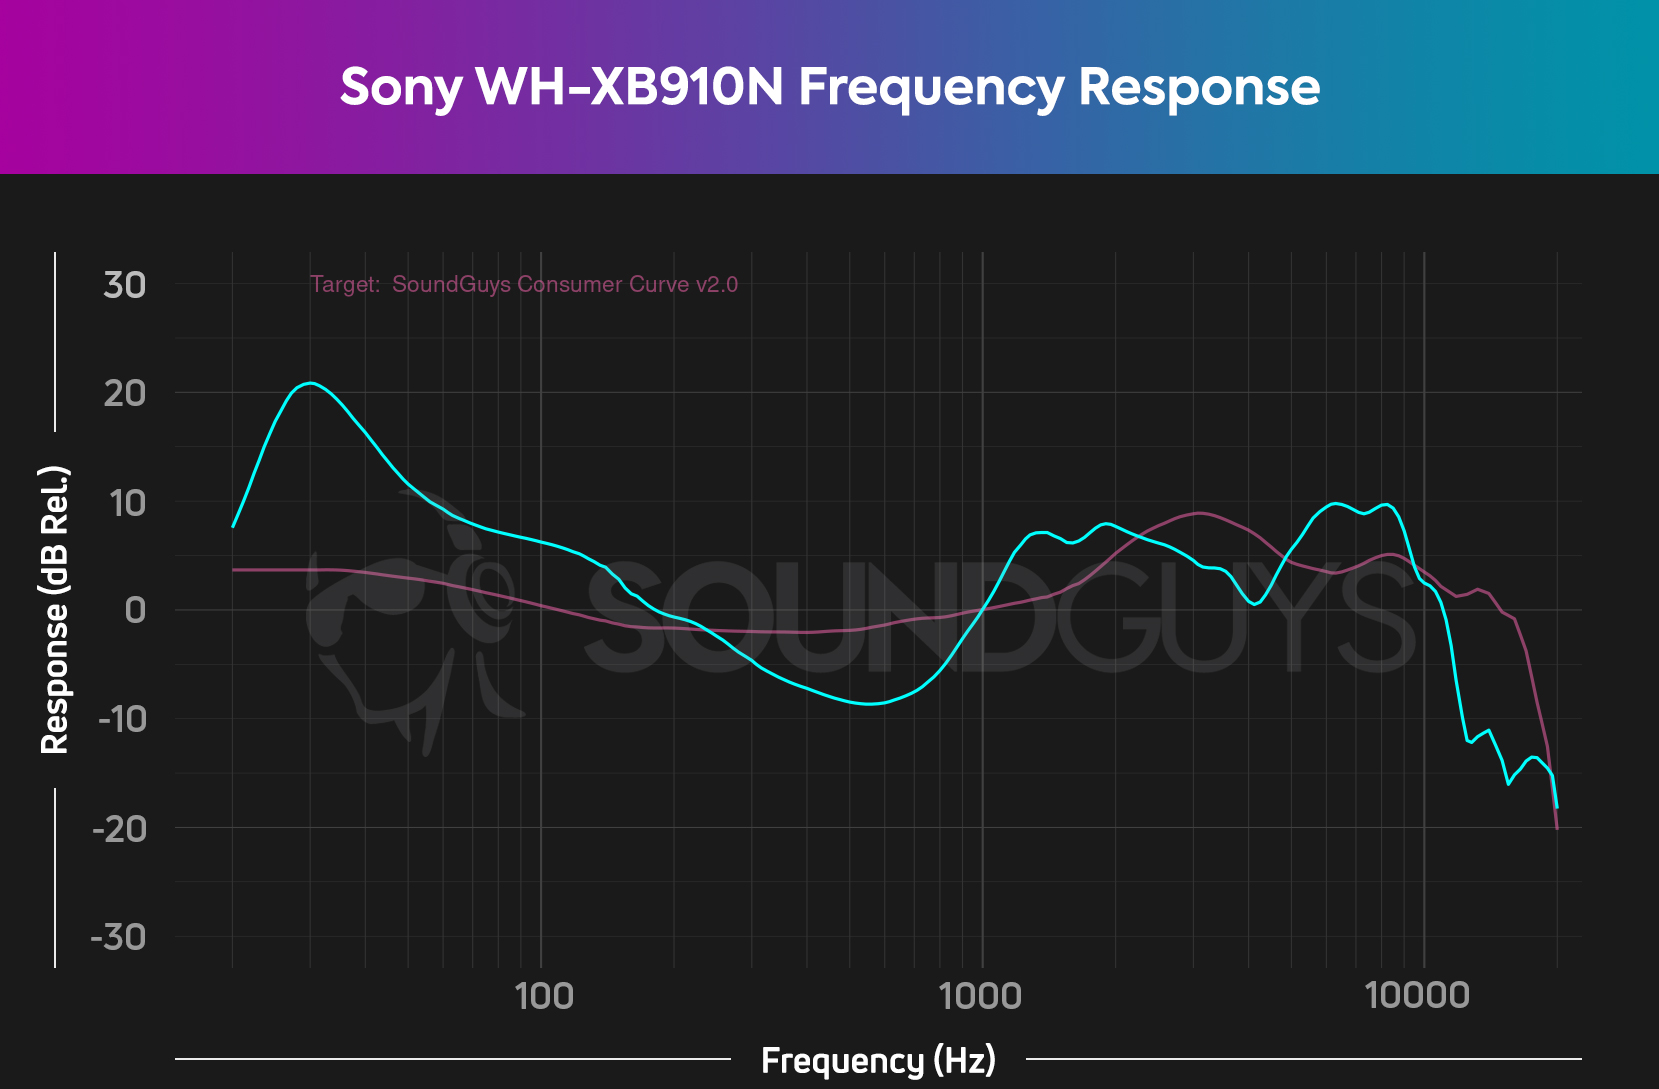 This frequency response chart of the Sony WH-XB910N shows a significantly exaggerated bass and under-emphasized mids.